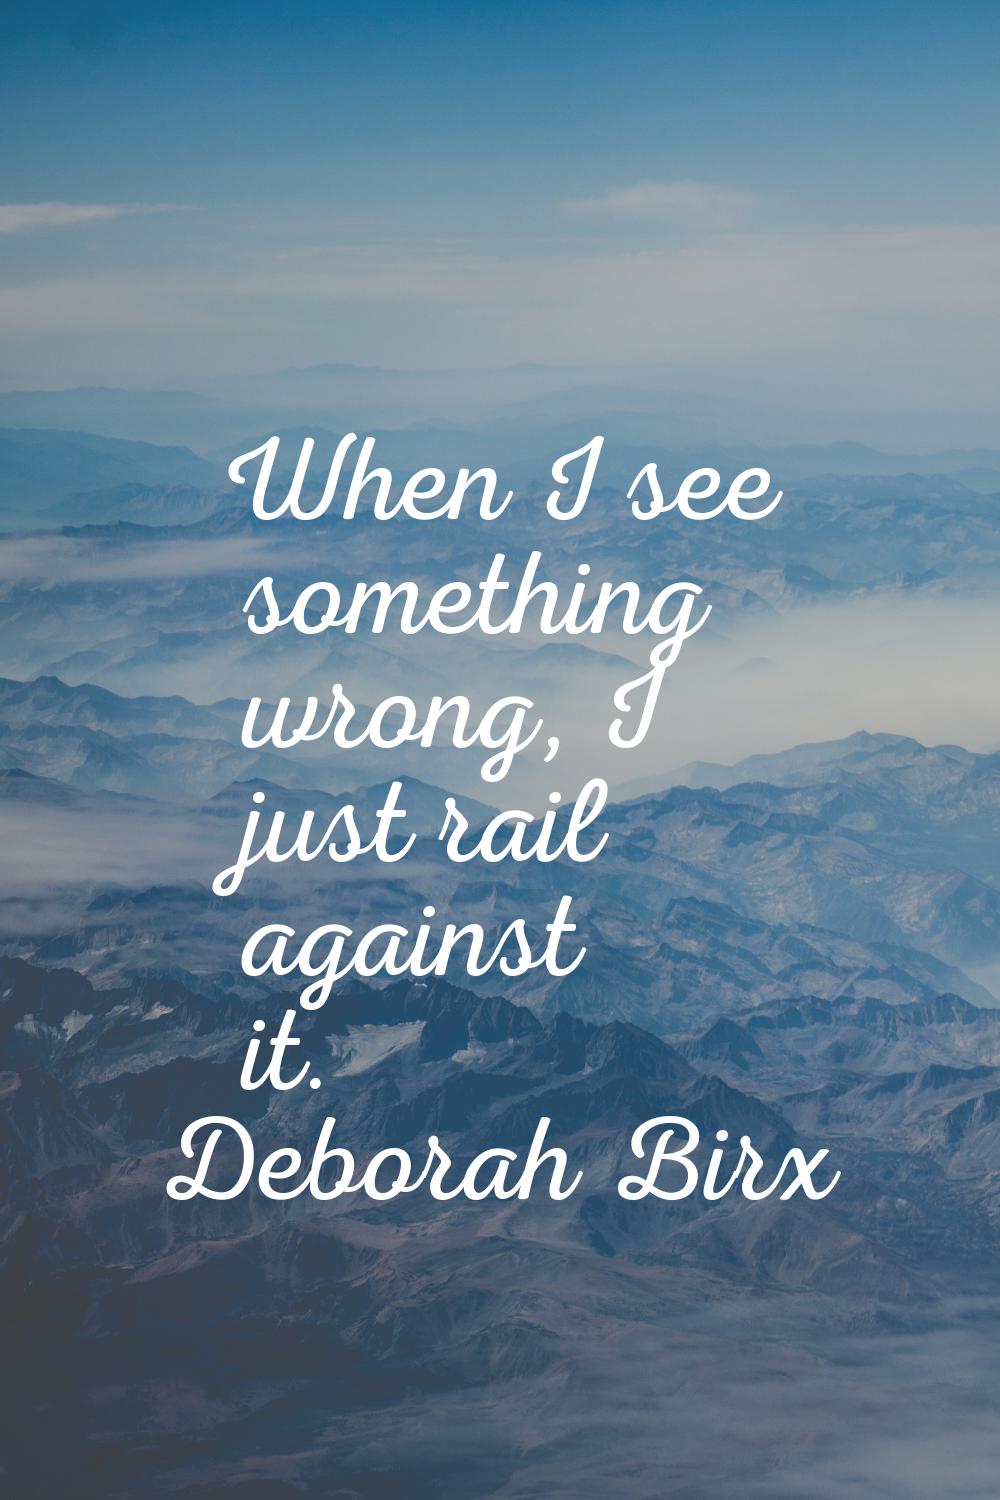 When I see something wrong, I just rail against it.